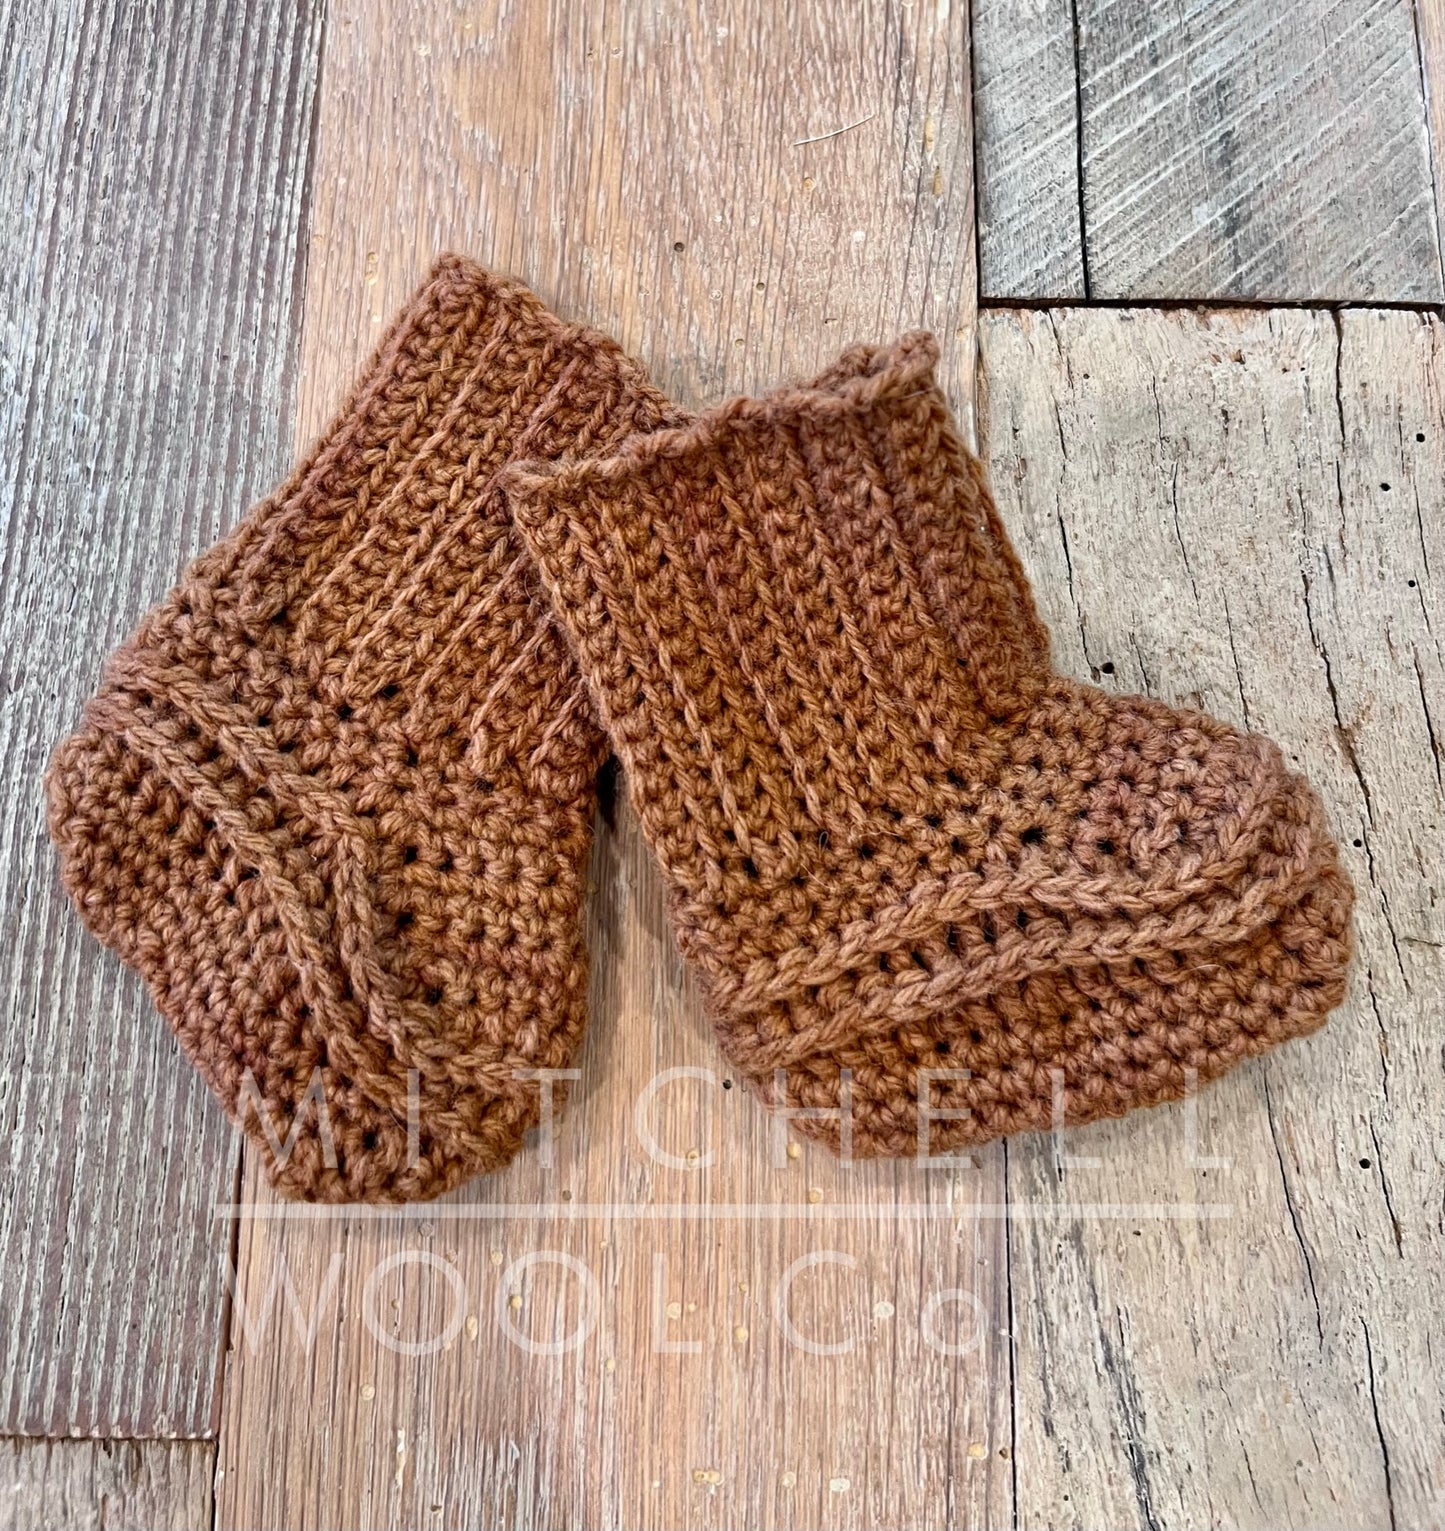 Hand crocheted booties dyed with cutch cormo dk yarn sit on our worn barn wood shop floor.